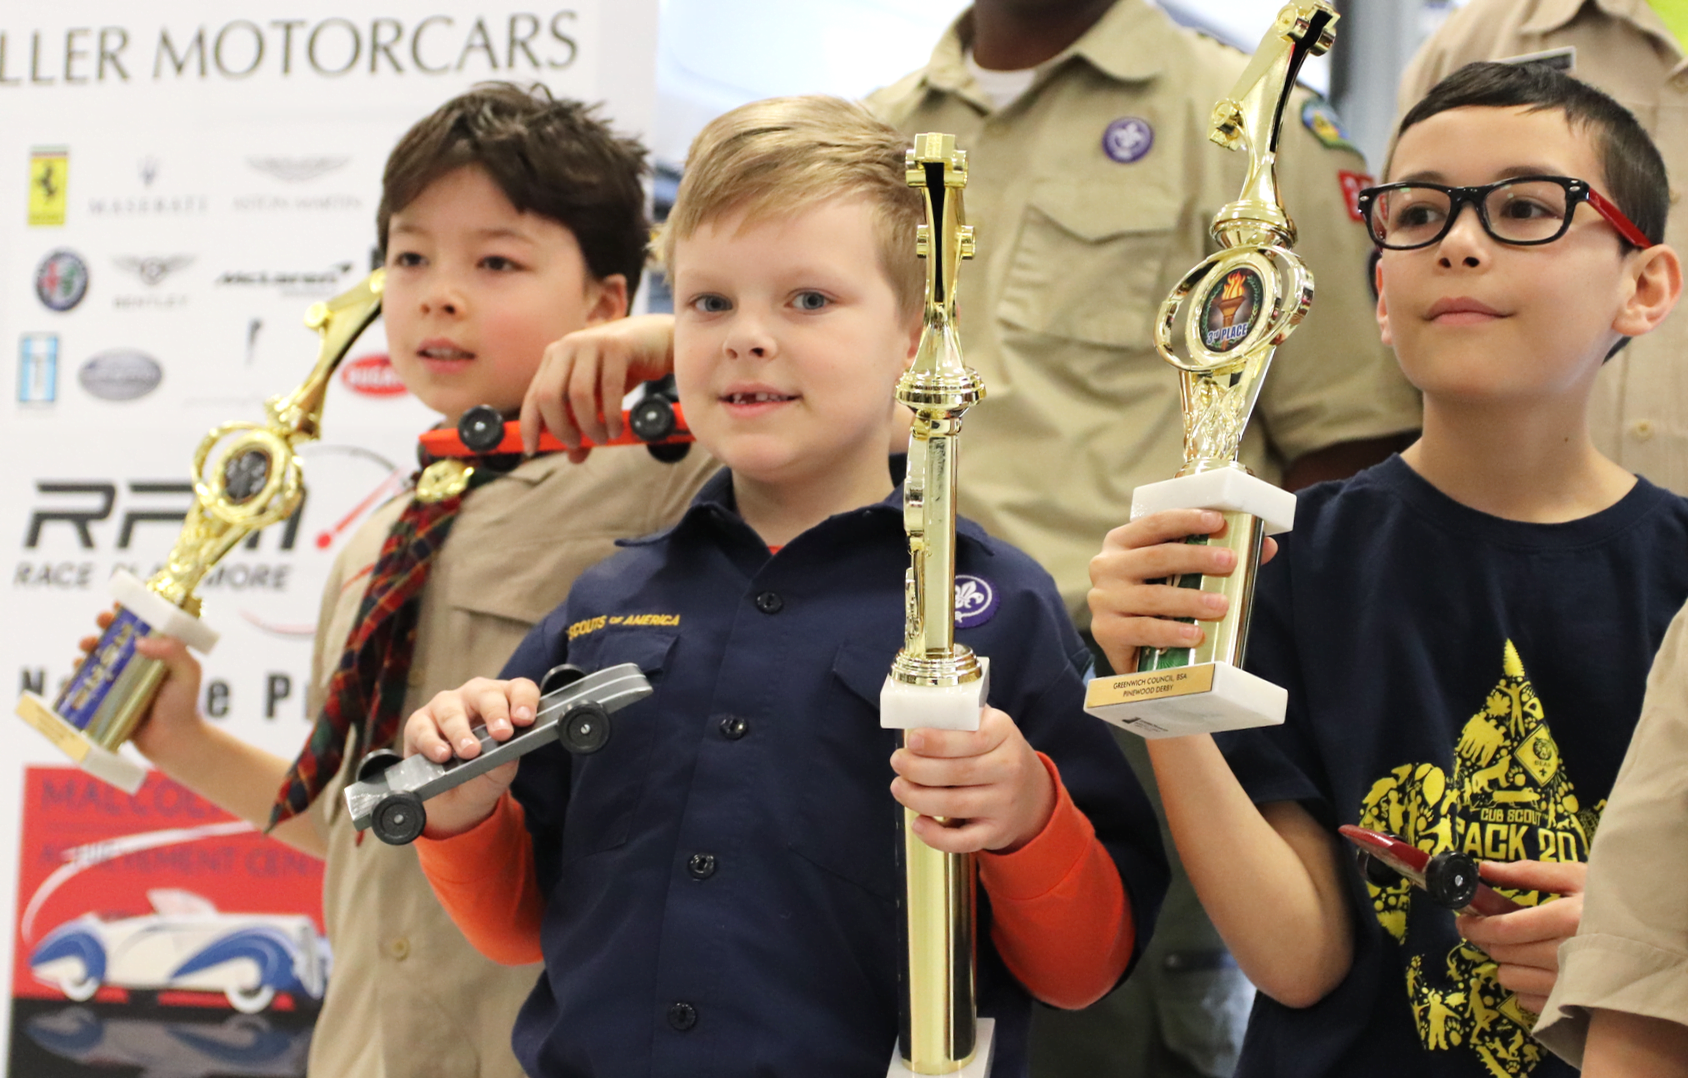 The annual Cub Scouts Pinewood Derby was held at Miller Motorcars on Sunday, March 8, 2020 Photo: Leslie Yager